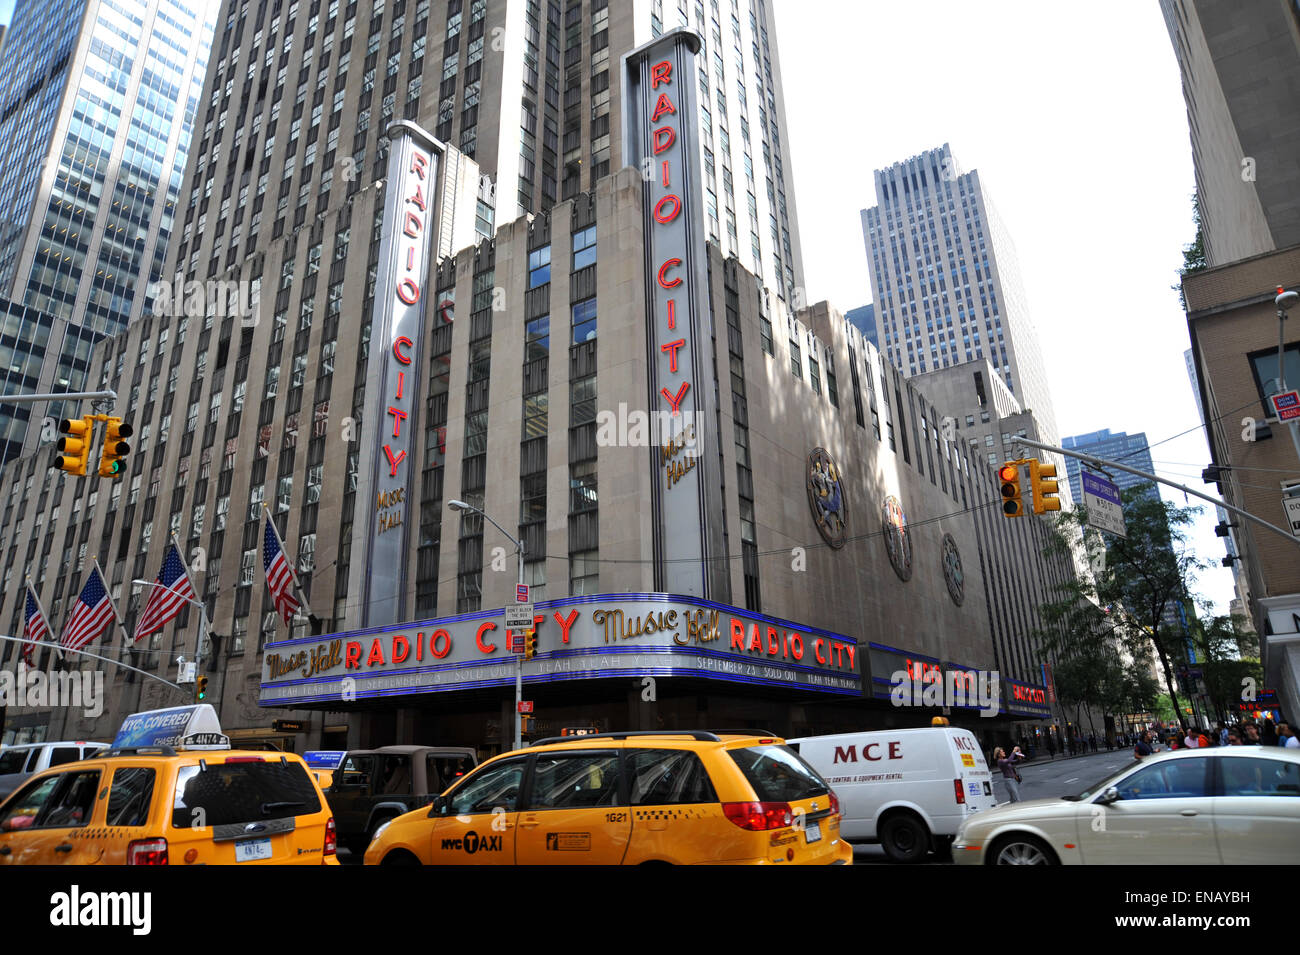 Radio City Music Hall, art deco New York surrounded by yellow cabs Stock Photo